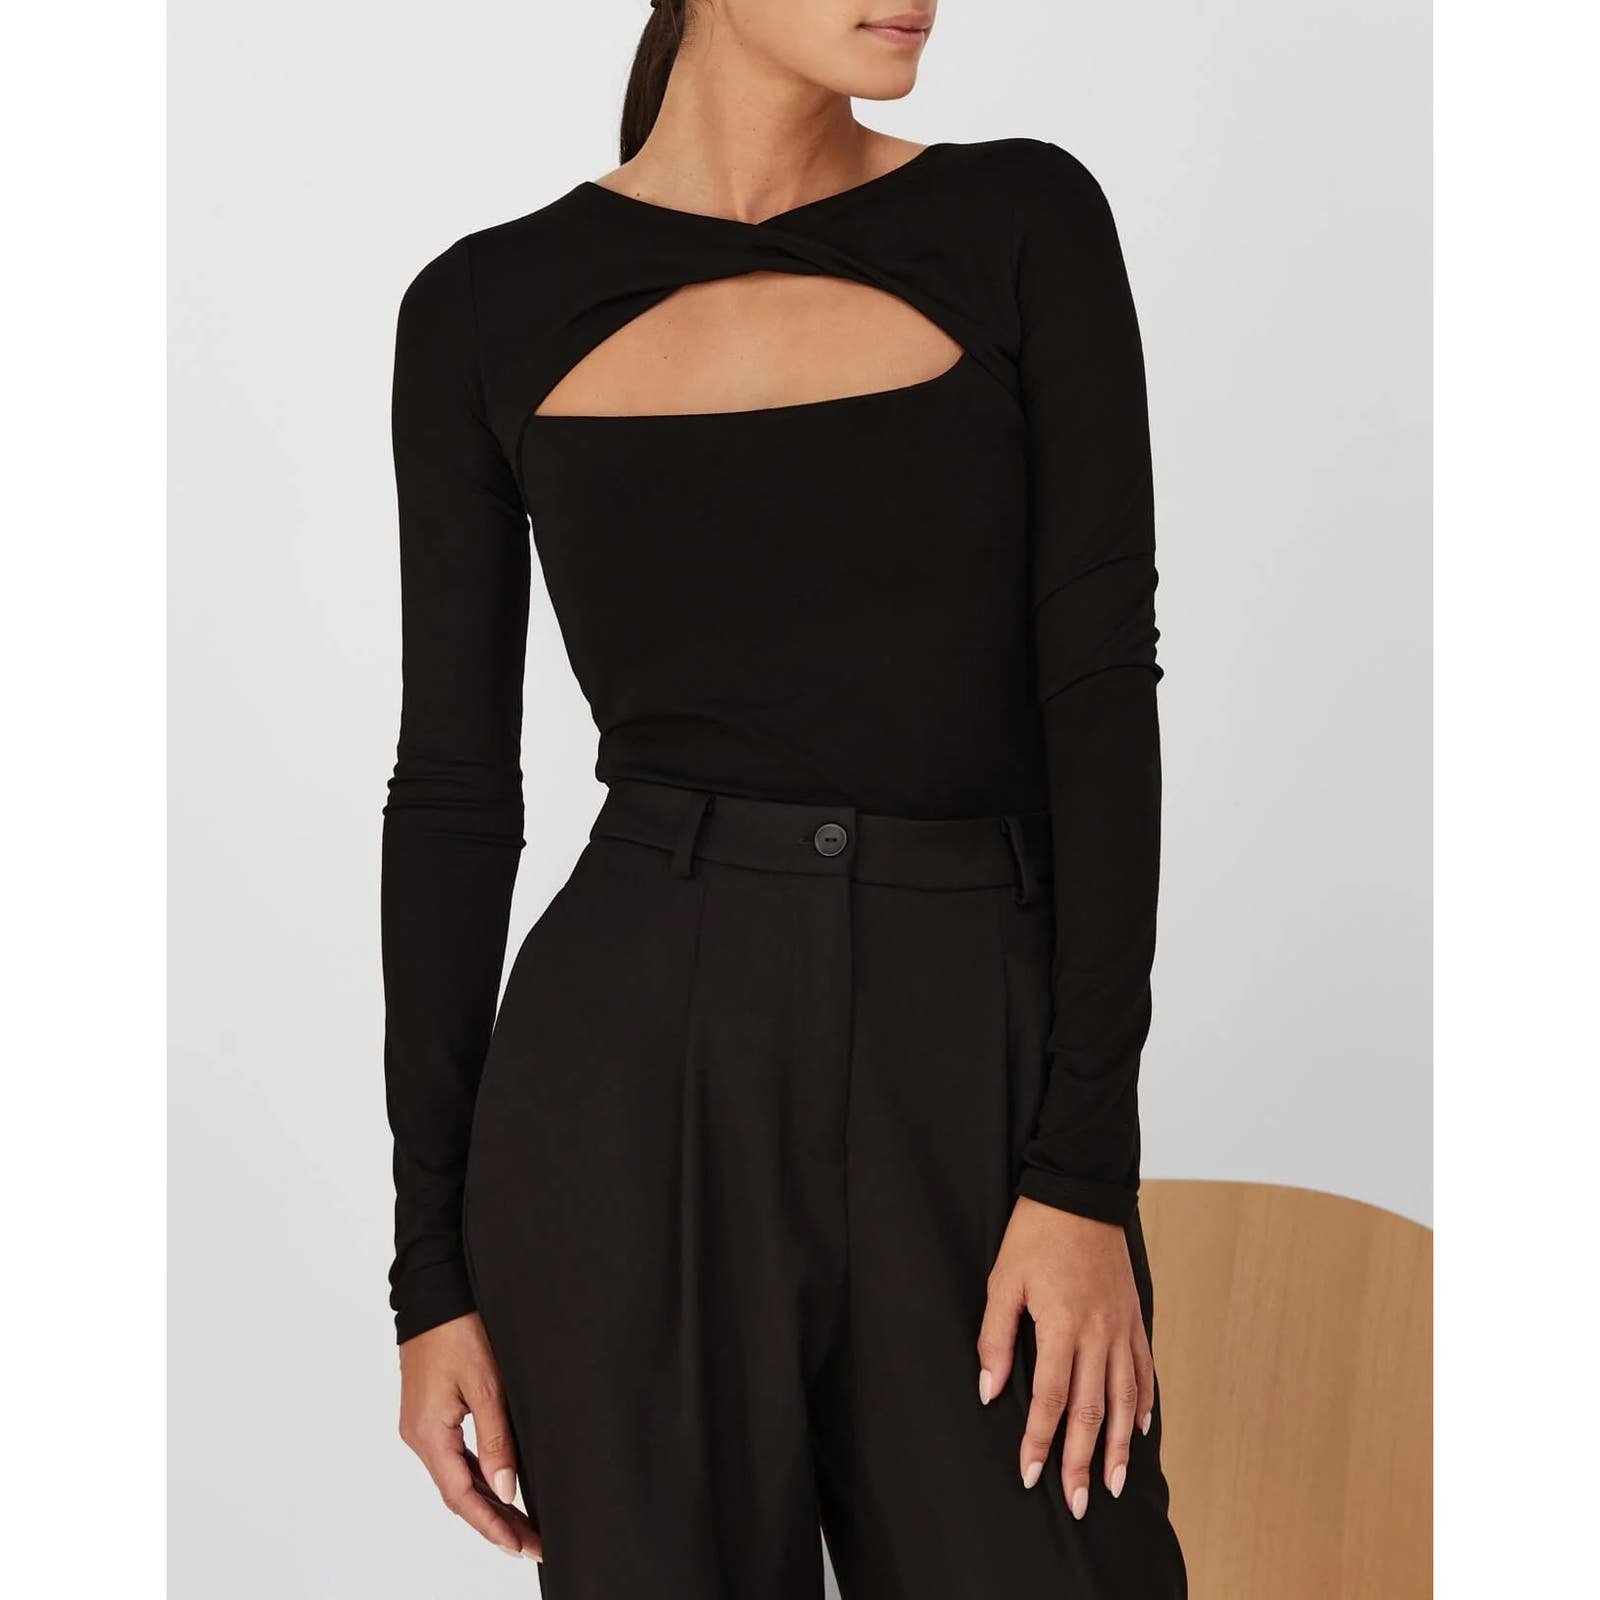 large discount Marcella NYC Orion Top Black Cut Out Twi